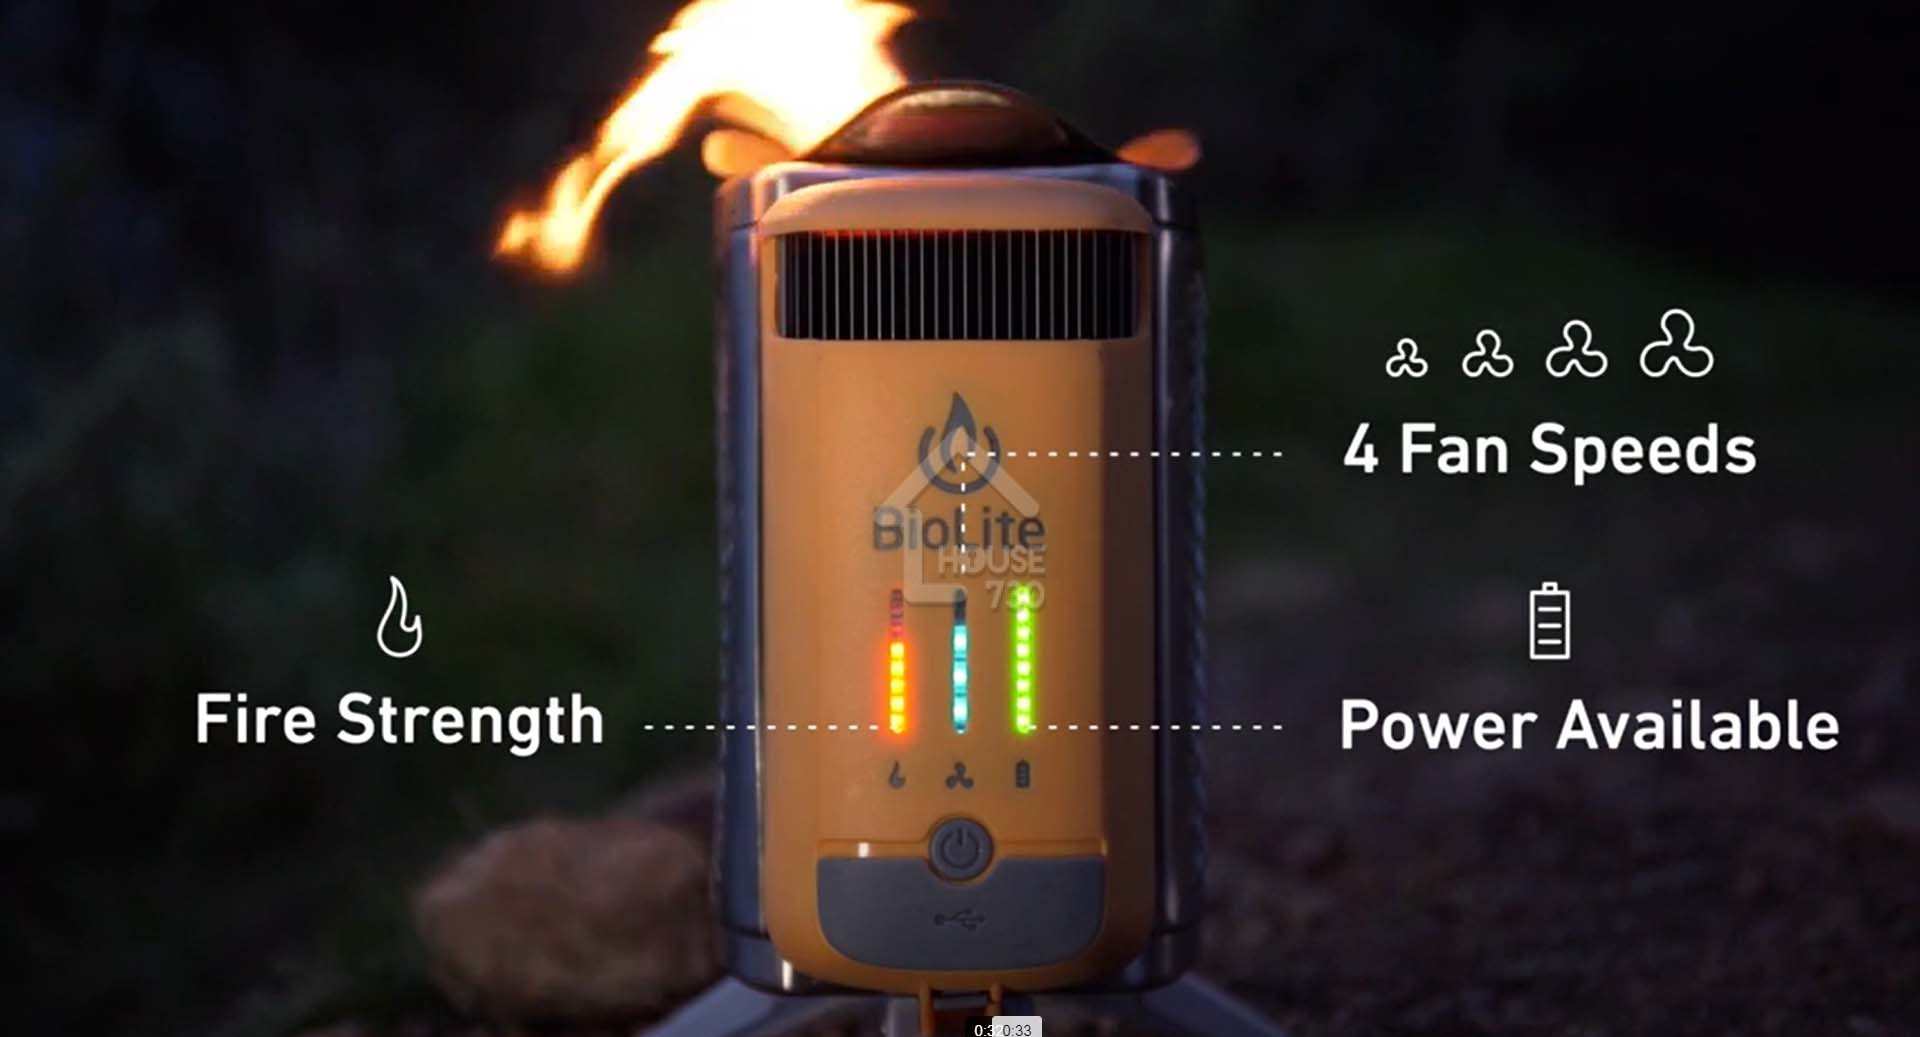 Camp Stove and Charger: Biolite CampStove 2